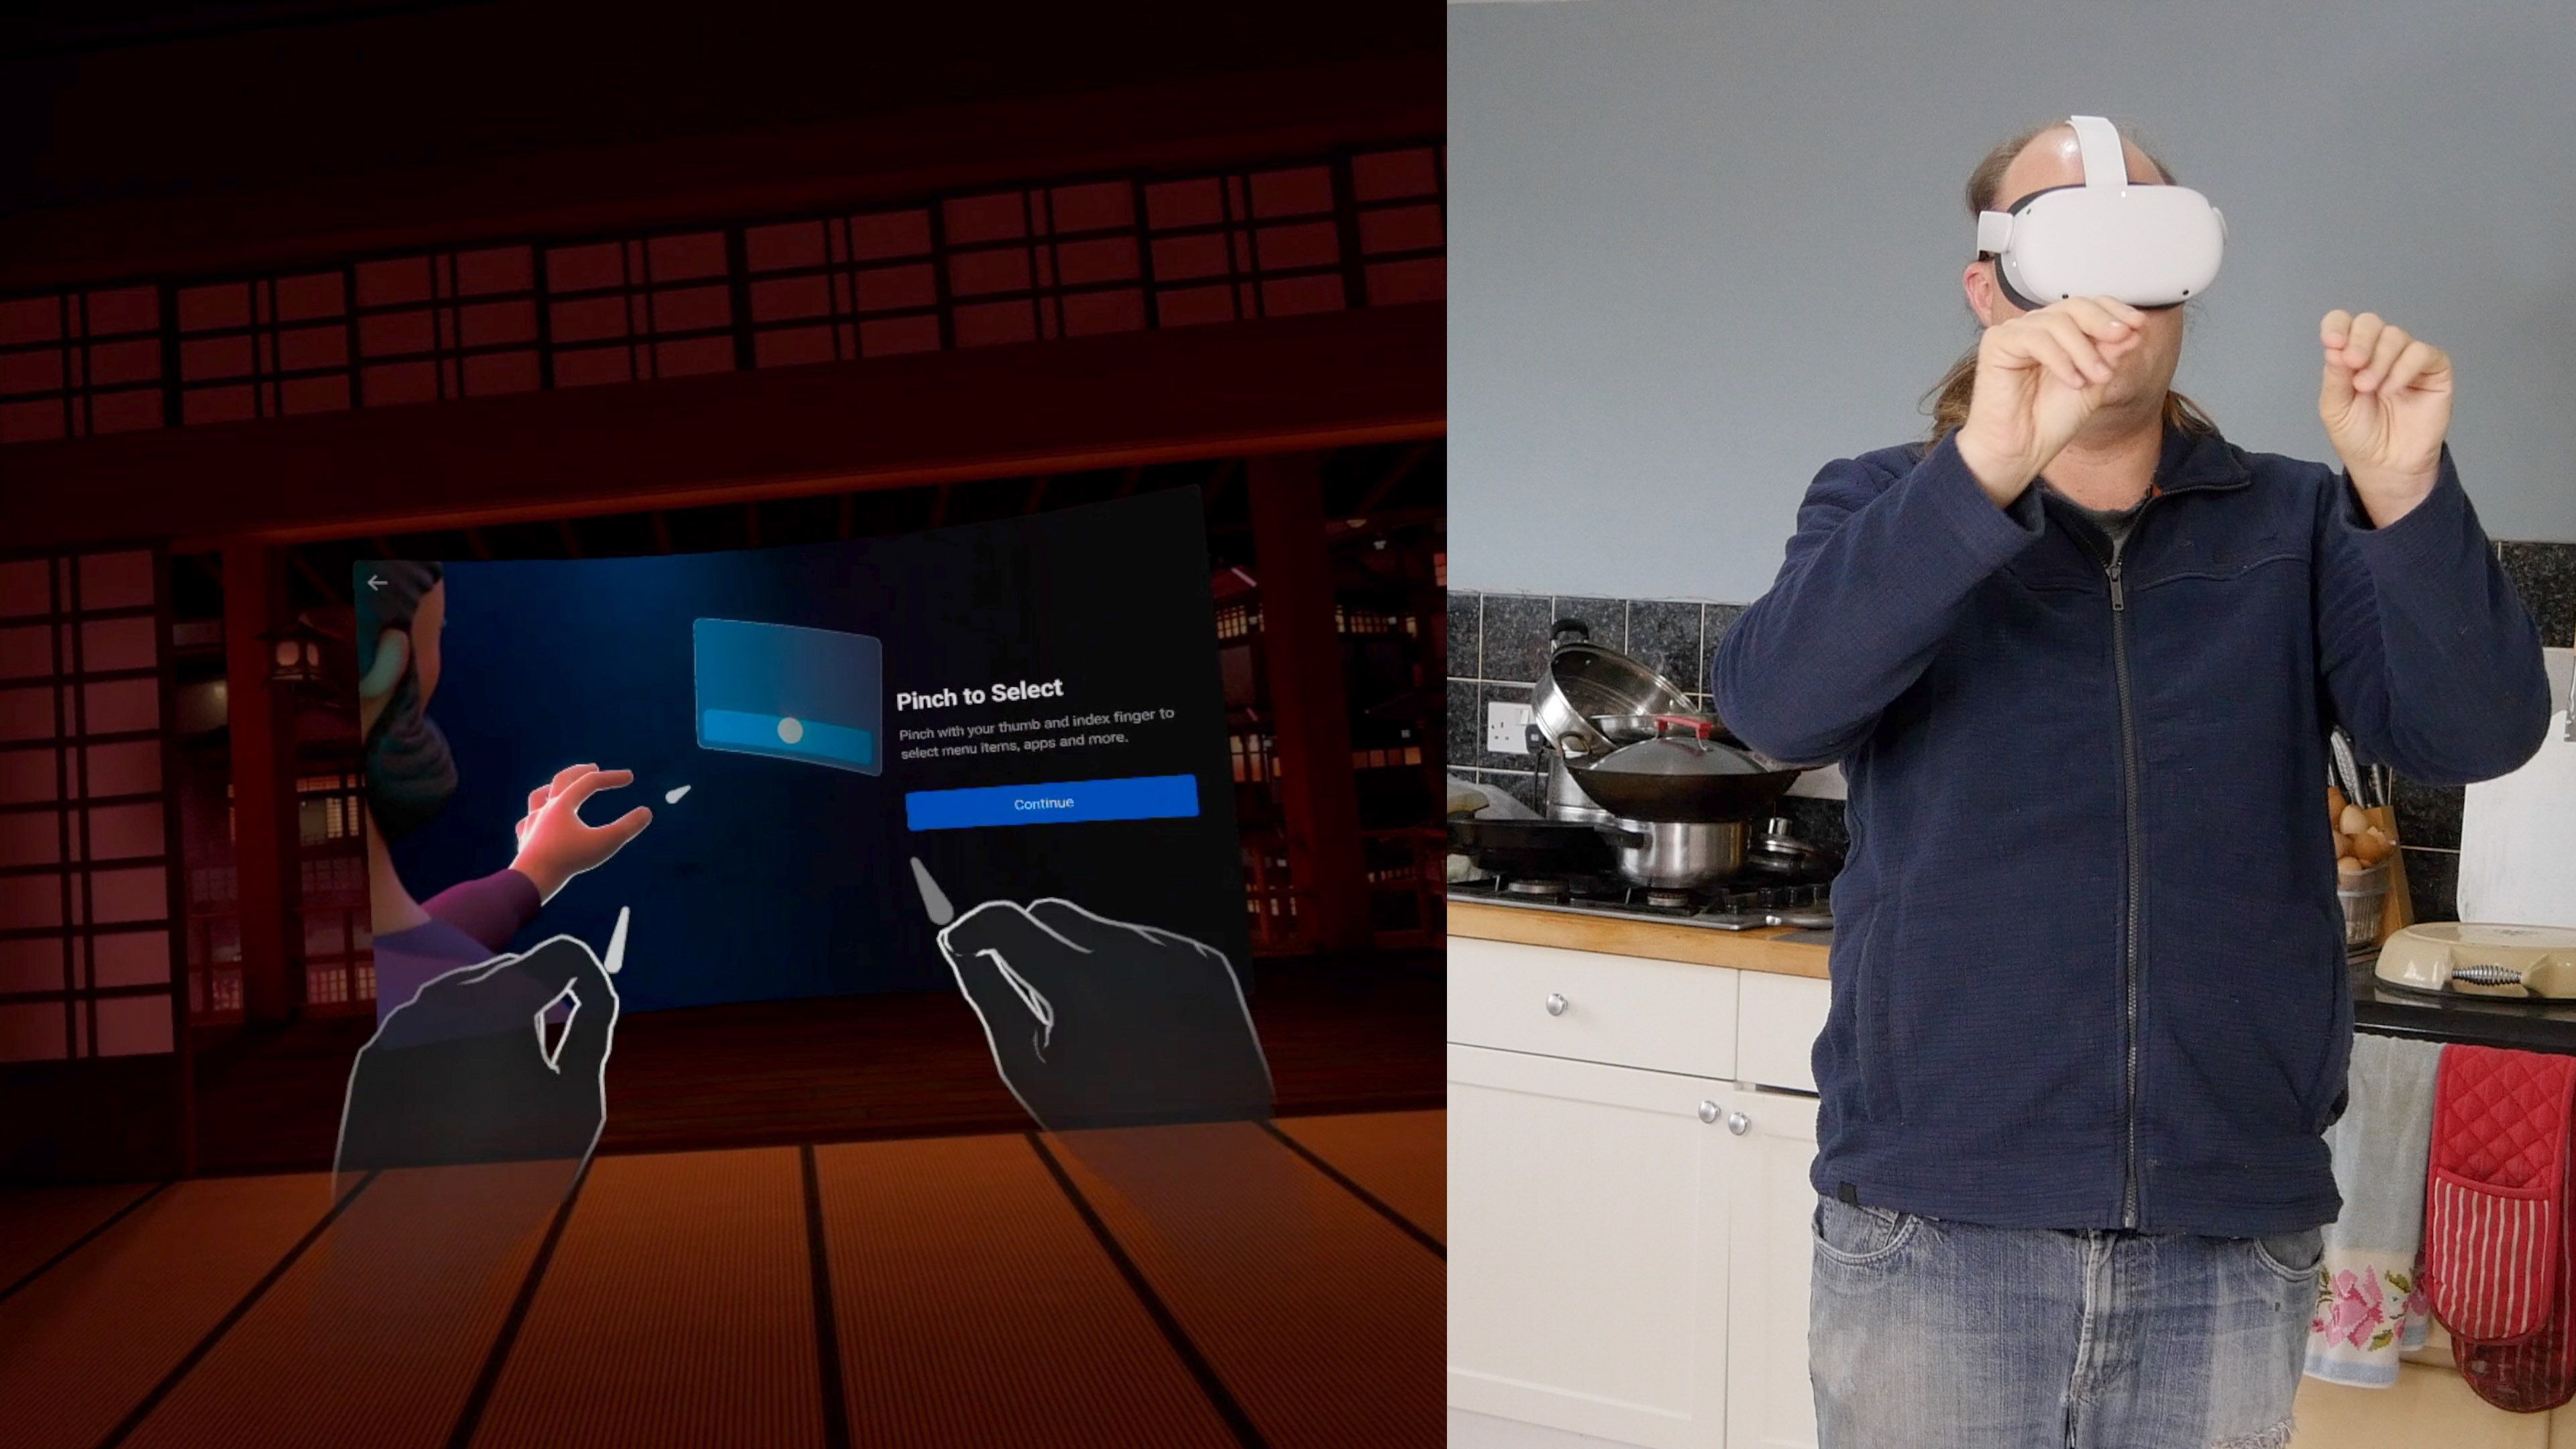 install oculus quest 2 app on pc